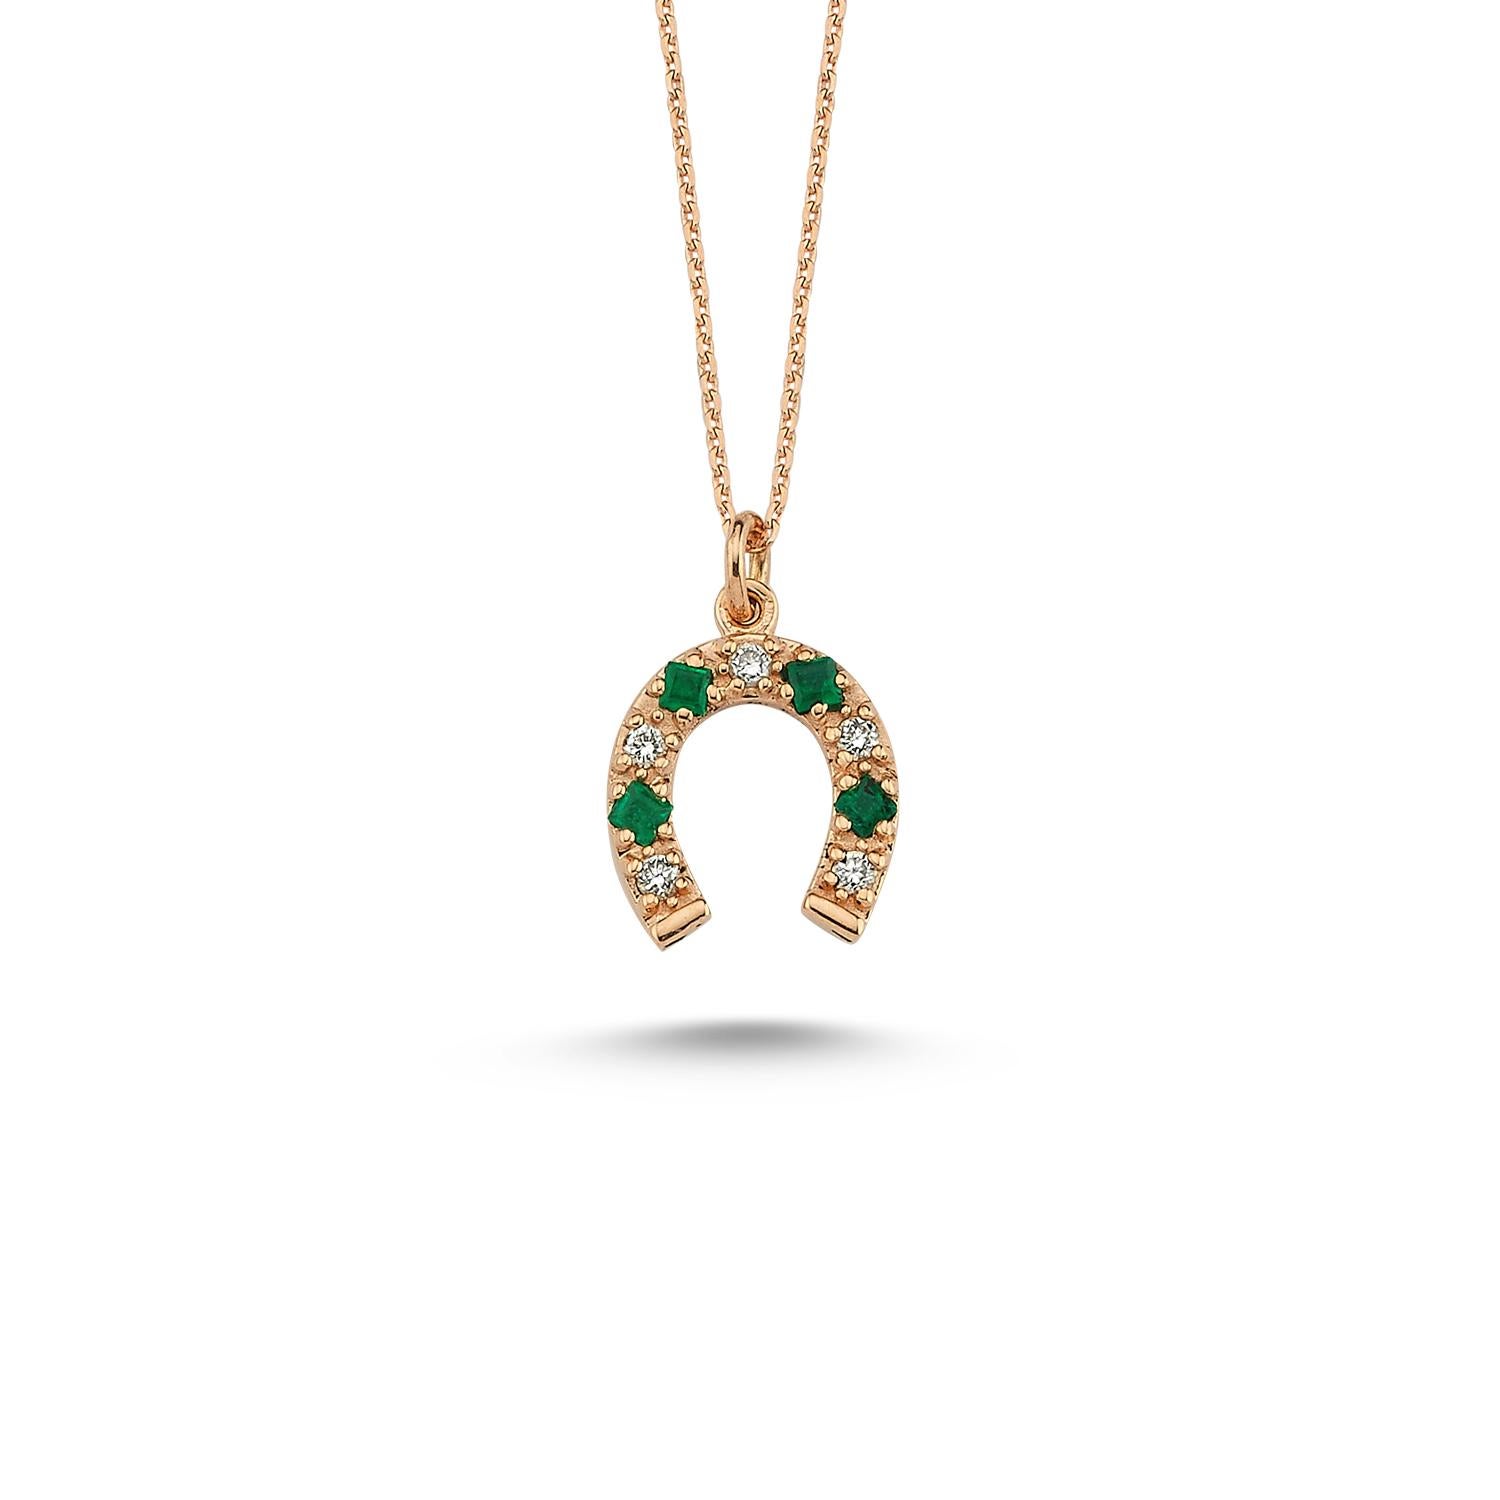 Horseshoe necklace in 14k rose gold with 0.06ct white diamond by Selda Jewellery

Additional Information:-
Collection: Art of giving collection
14K Rose gold
0.06ct White diamond
0.07ct Emerald
Pendant height 1cm
Chain length 42cm